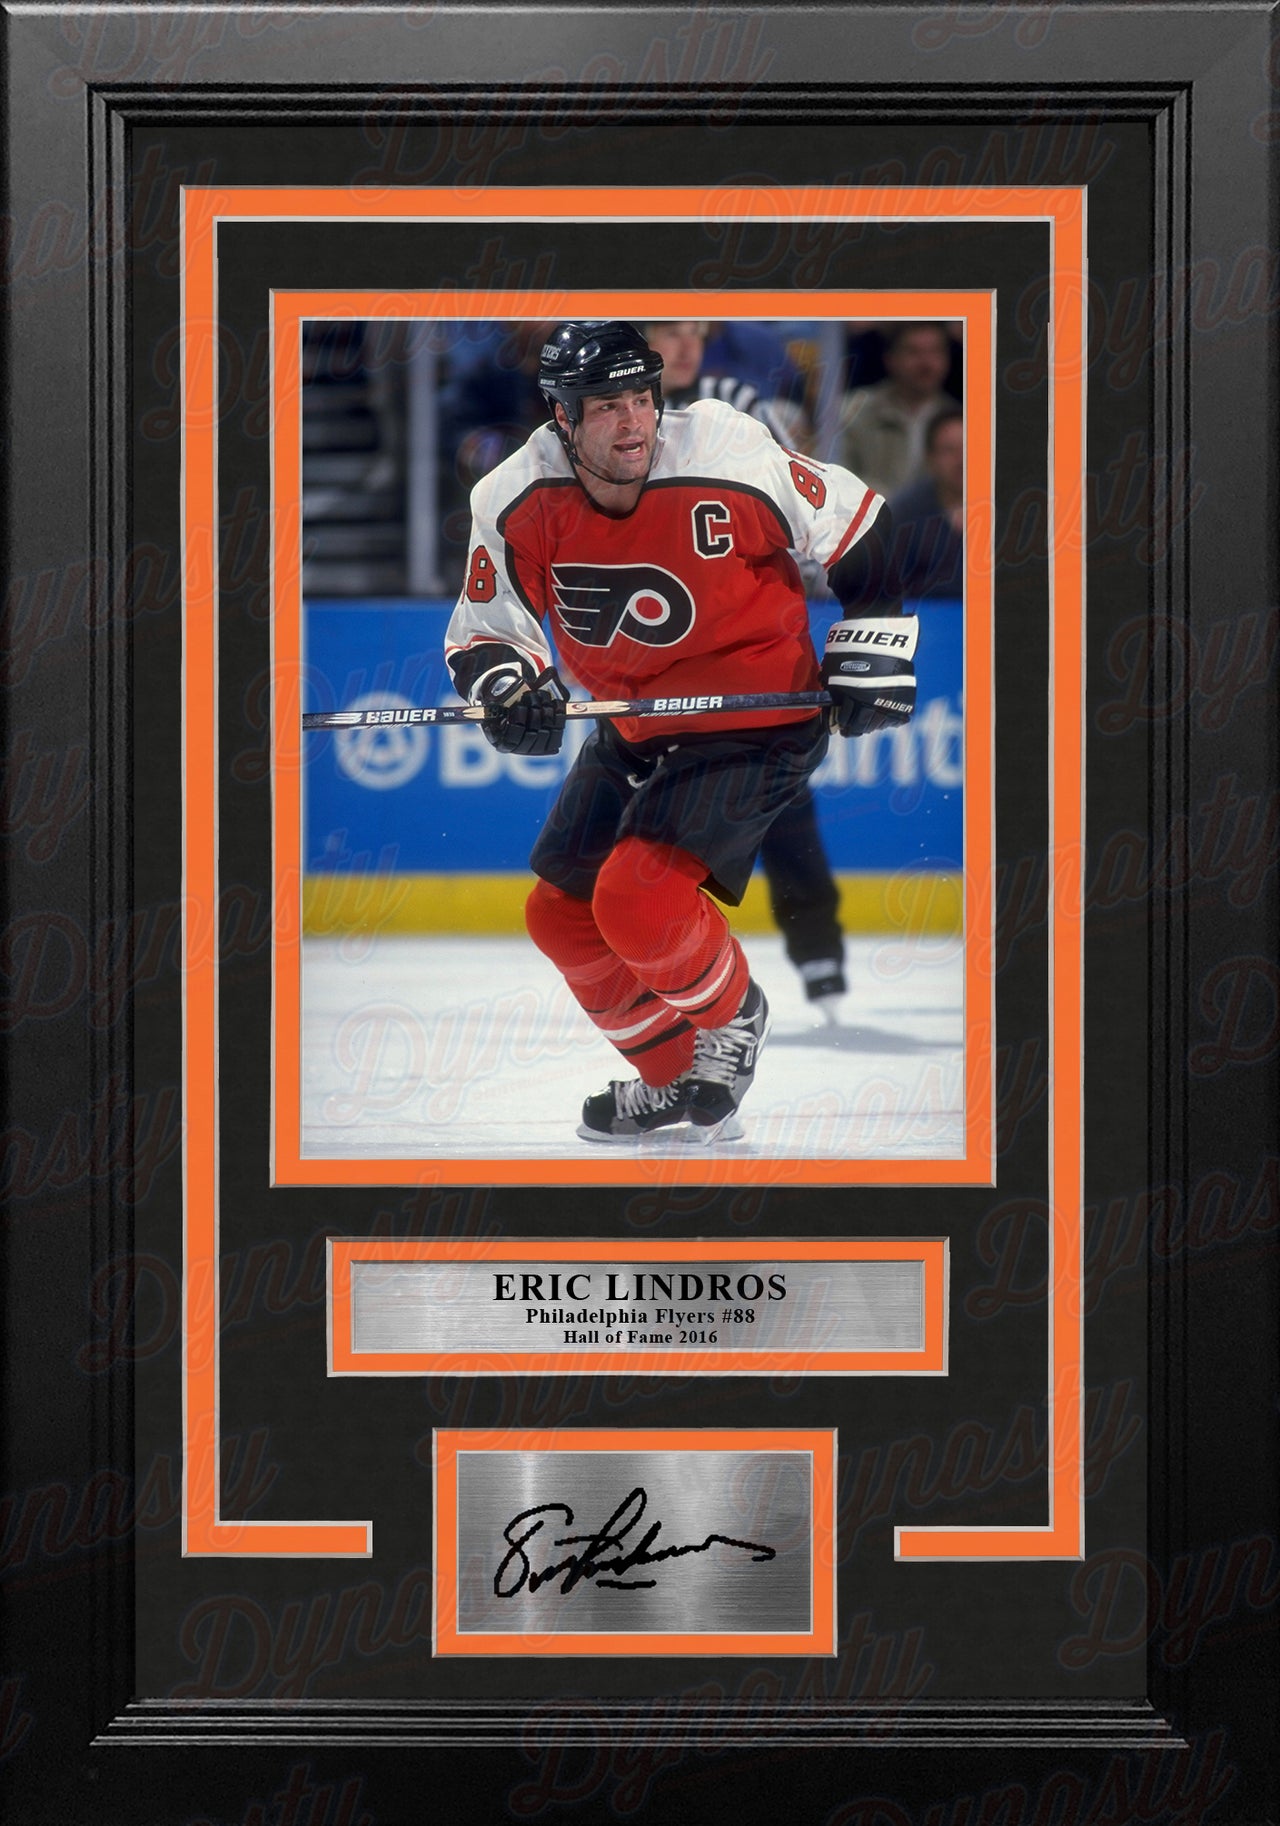 Eric Lindros in Action Philadelphia Flyers 8" x 10" Framed Hockey Photo with Engraved Autograph - Dynasty Sports & Framing 